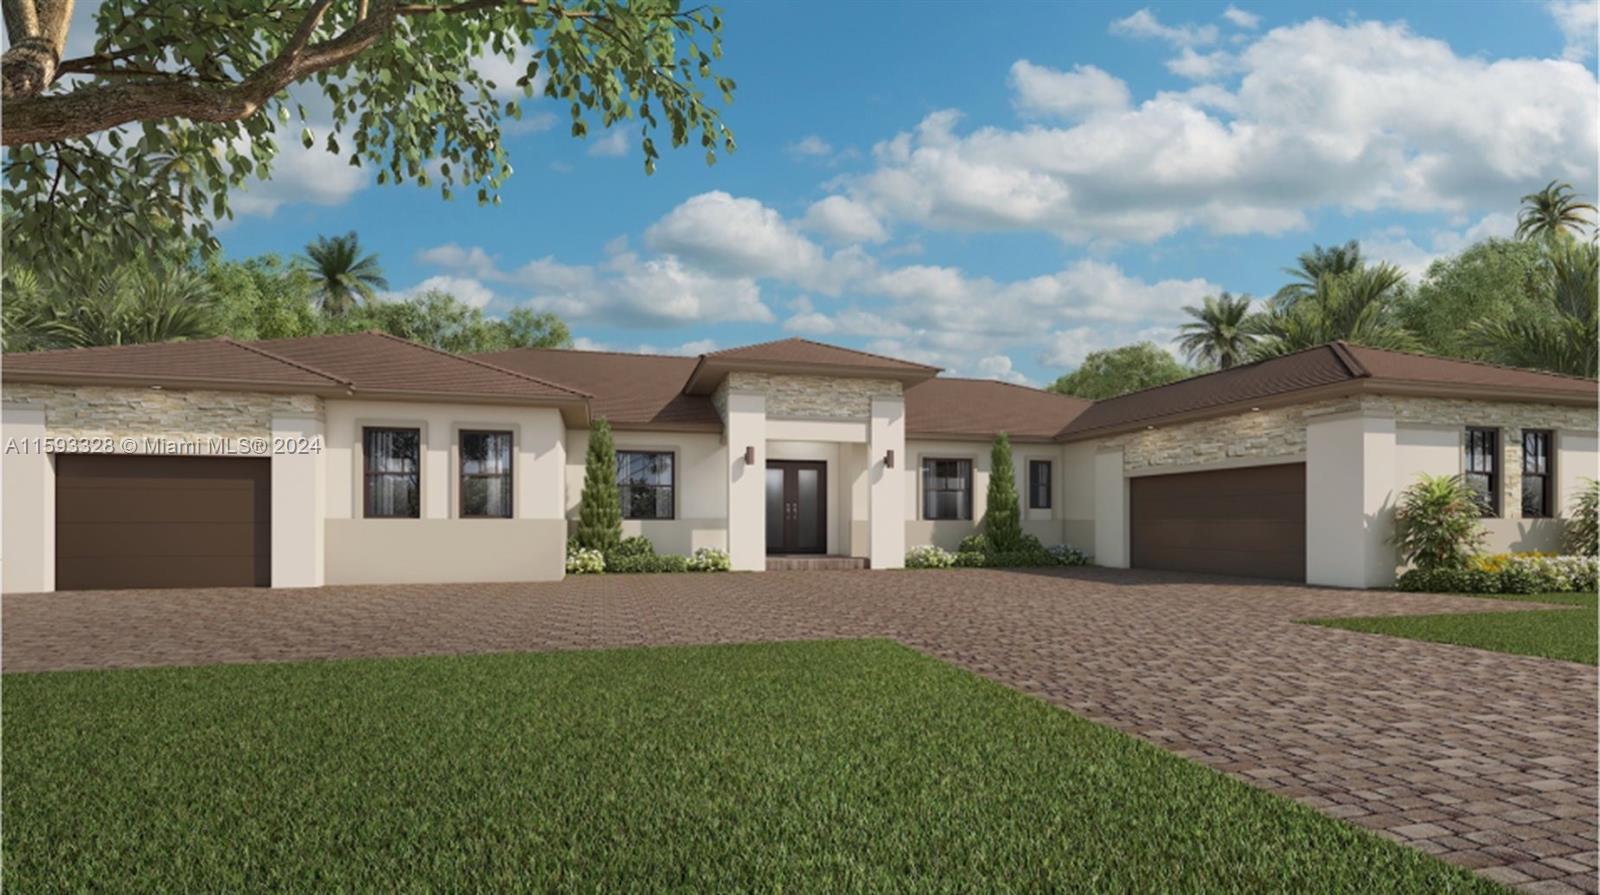 Come see this brand new one story, 5 bedrooms, 5.5 bath home. Only 3 homes left in this newly developed " Sanctuary Grande" community.  10' ceilings, Wolf and Subzero to name a few of the things this smart home has to offer! This home will not last!